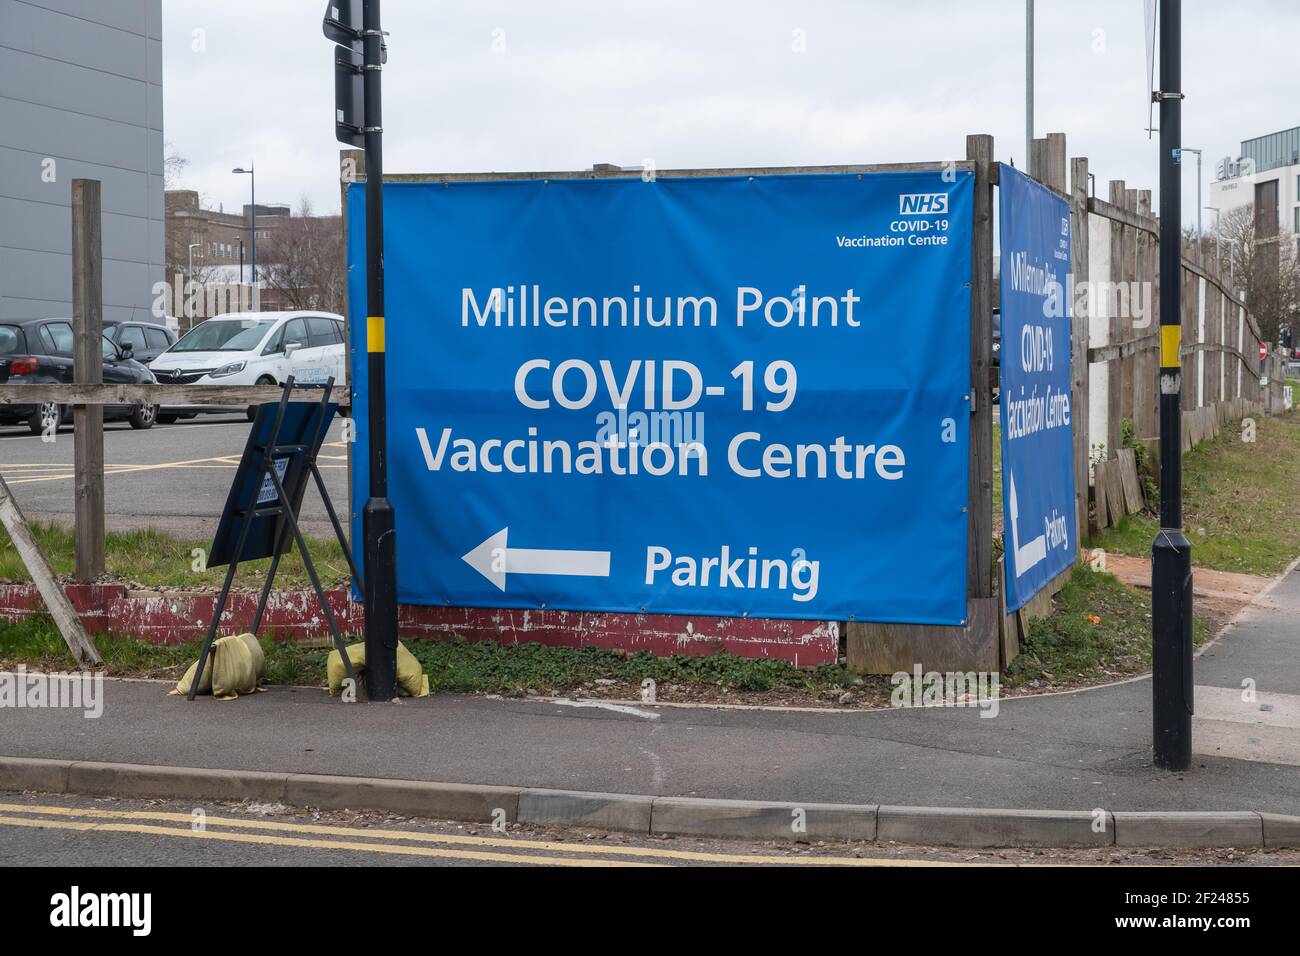 Large blue signs for the Covid-19 Vaccination Centre at Millennium Point in Birmingham, UK Stock Photo